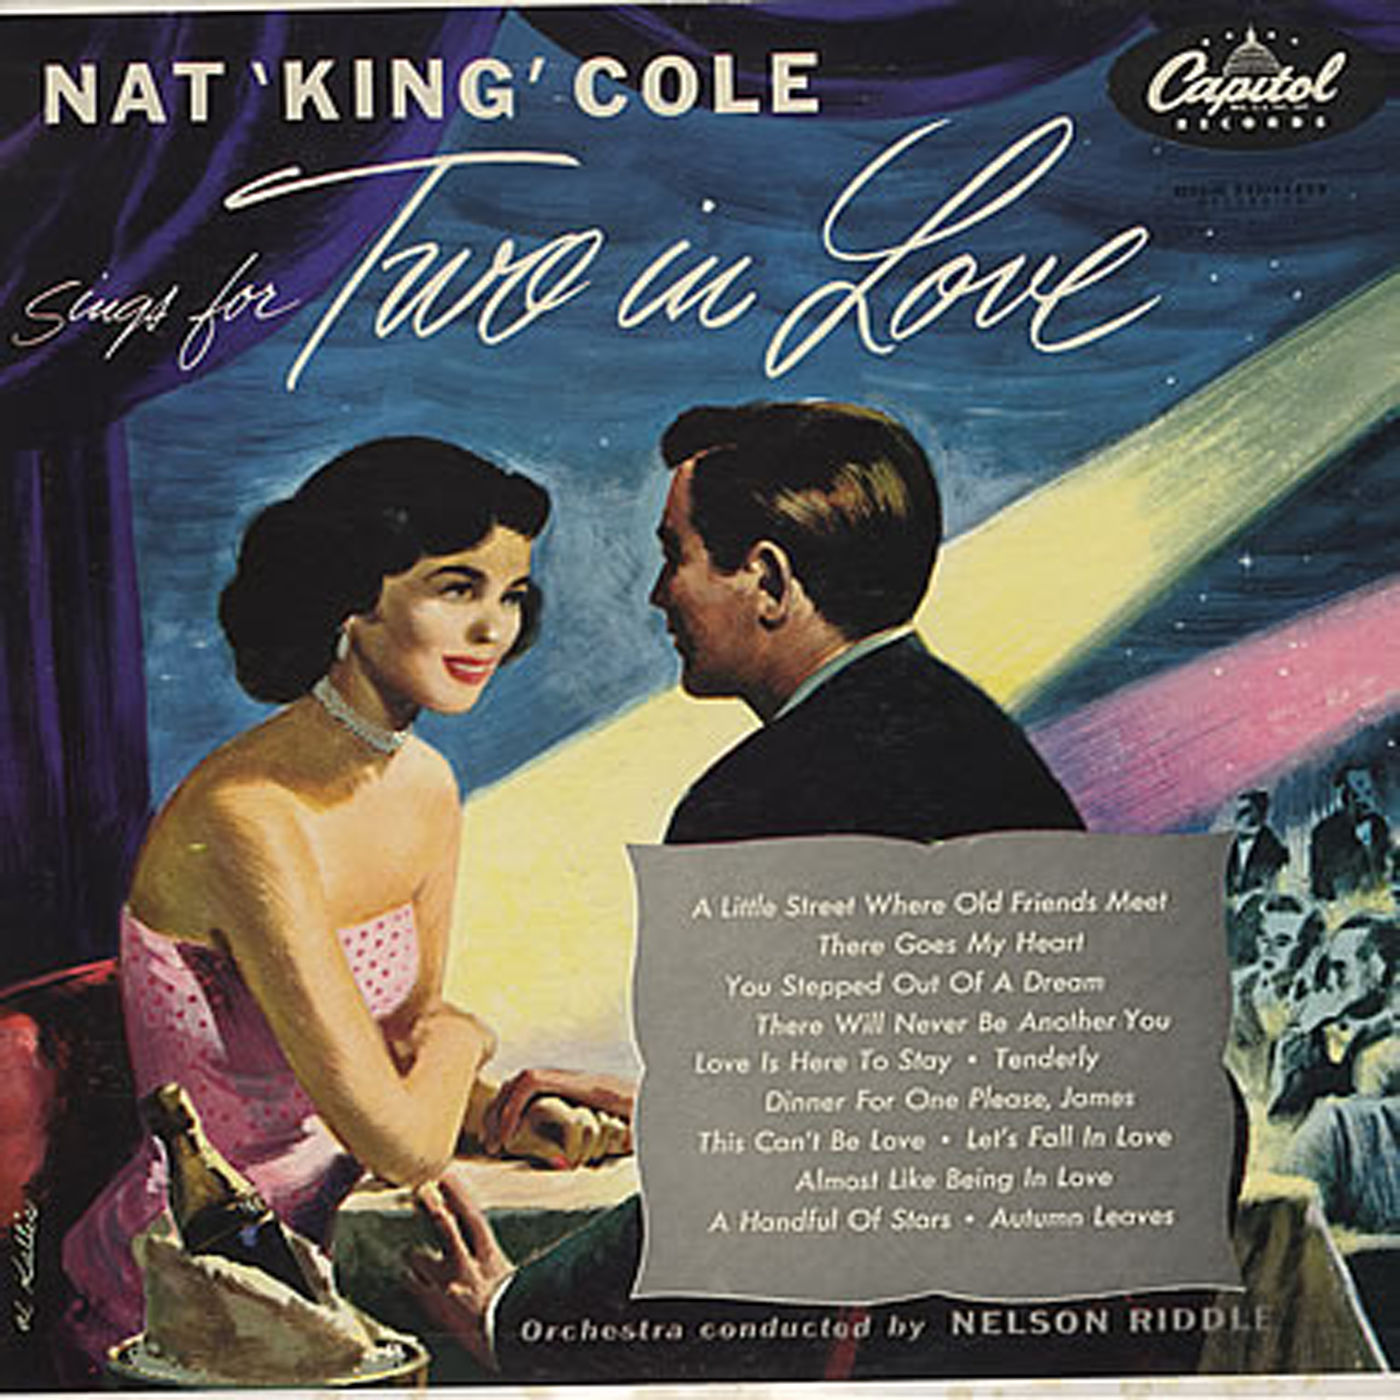 Nat King Cole – Sings For Two In Love (1955/2021) [FLAC 24bit/96kHz]